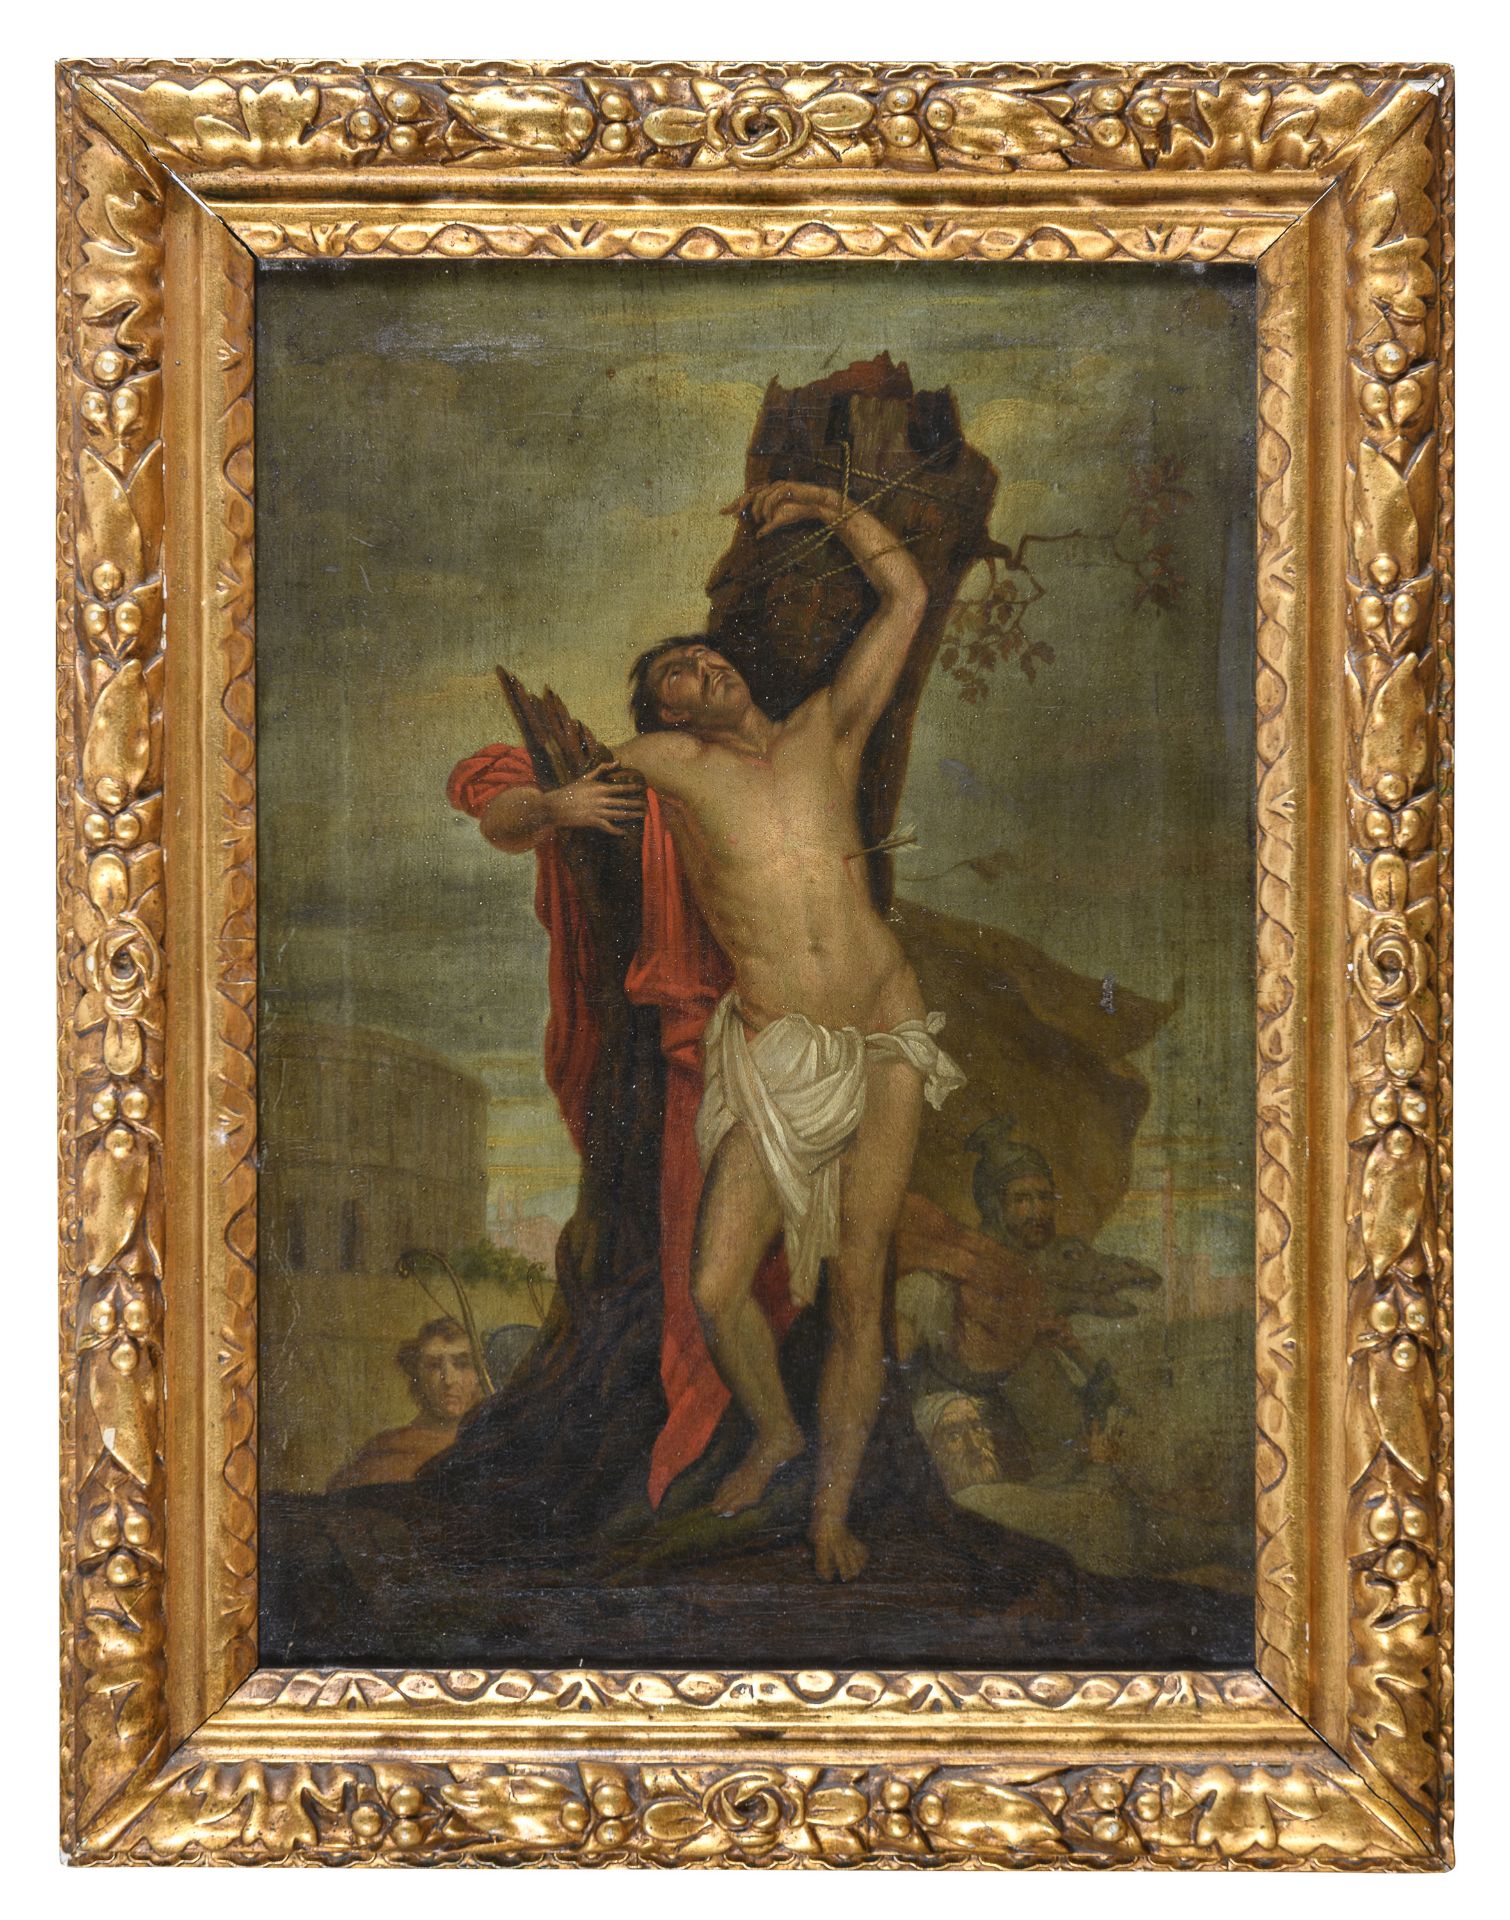 FRENCH OIL PAINTING EARLY 19TH CENTURY